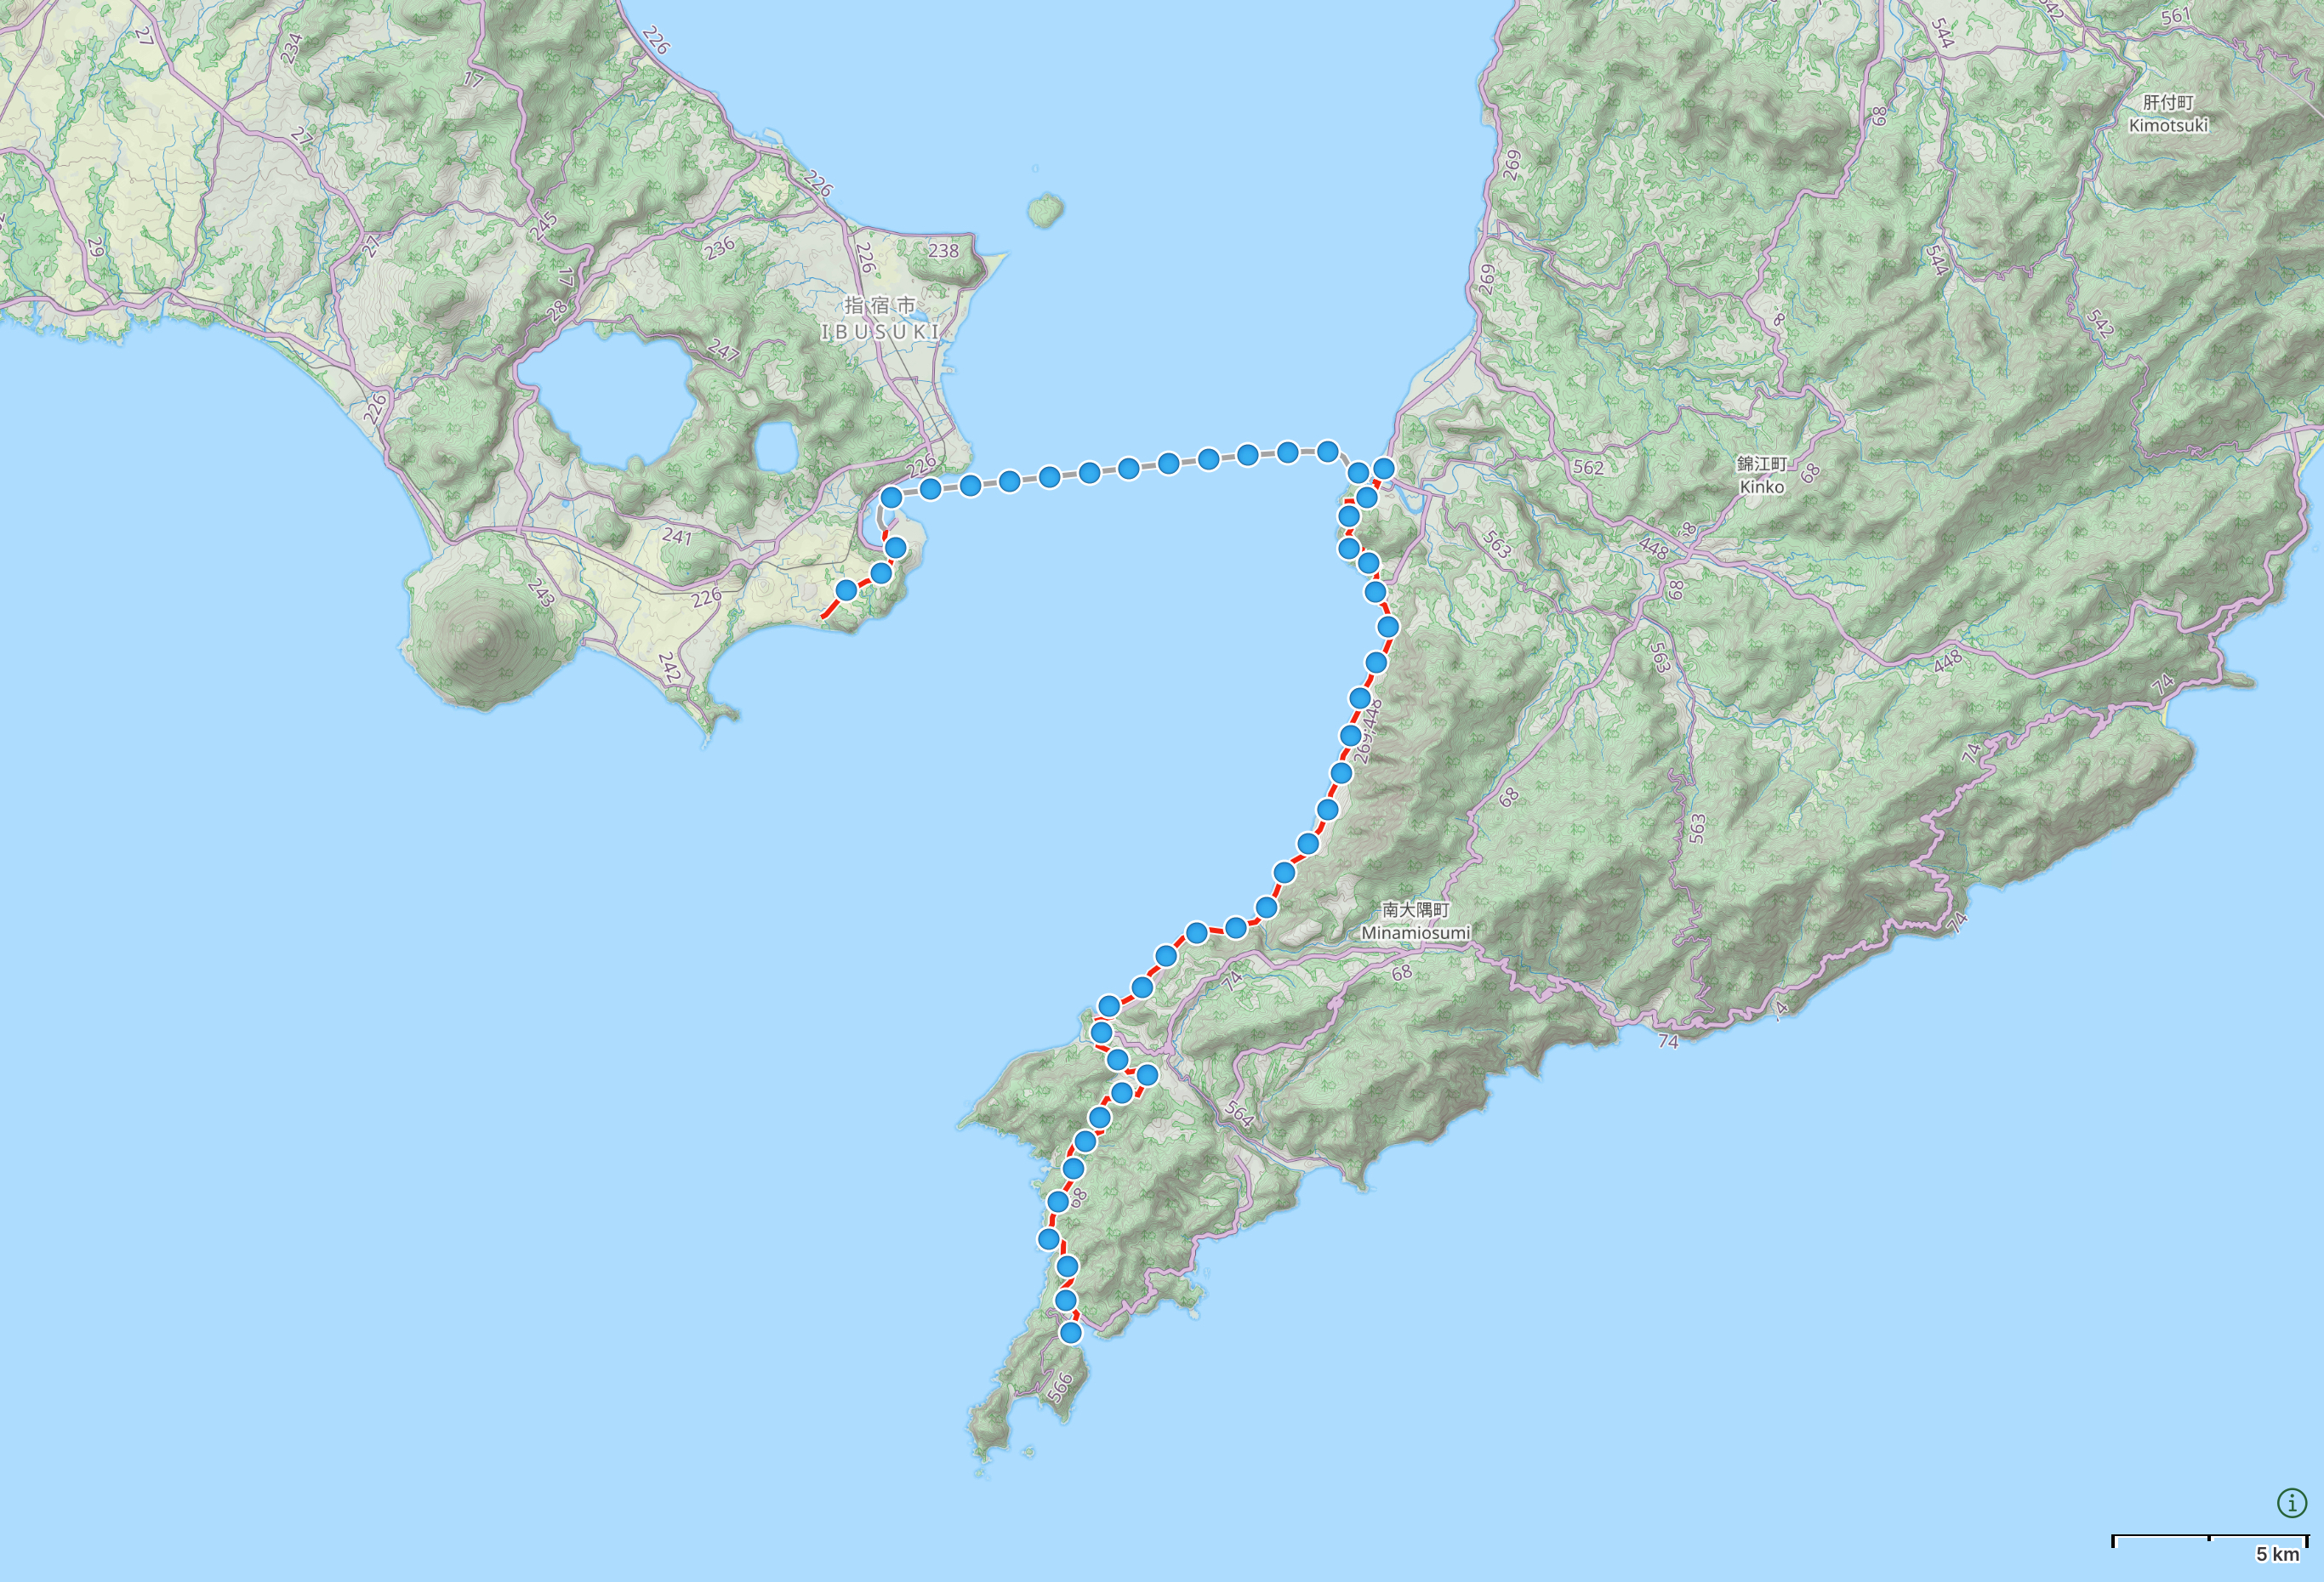 Map of Kagoshima Prefecture with author’s route across the bay between Yamakawa and Sata highlighted.